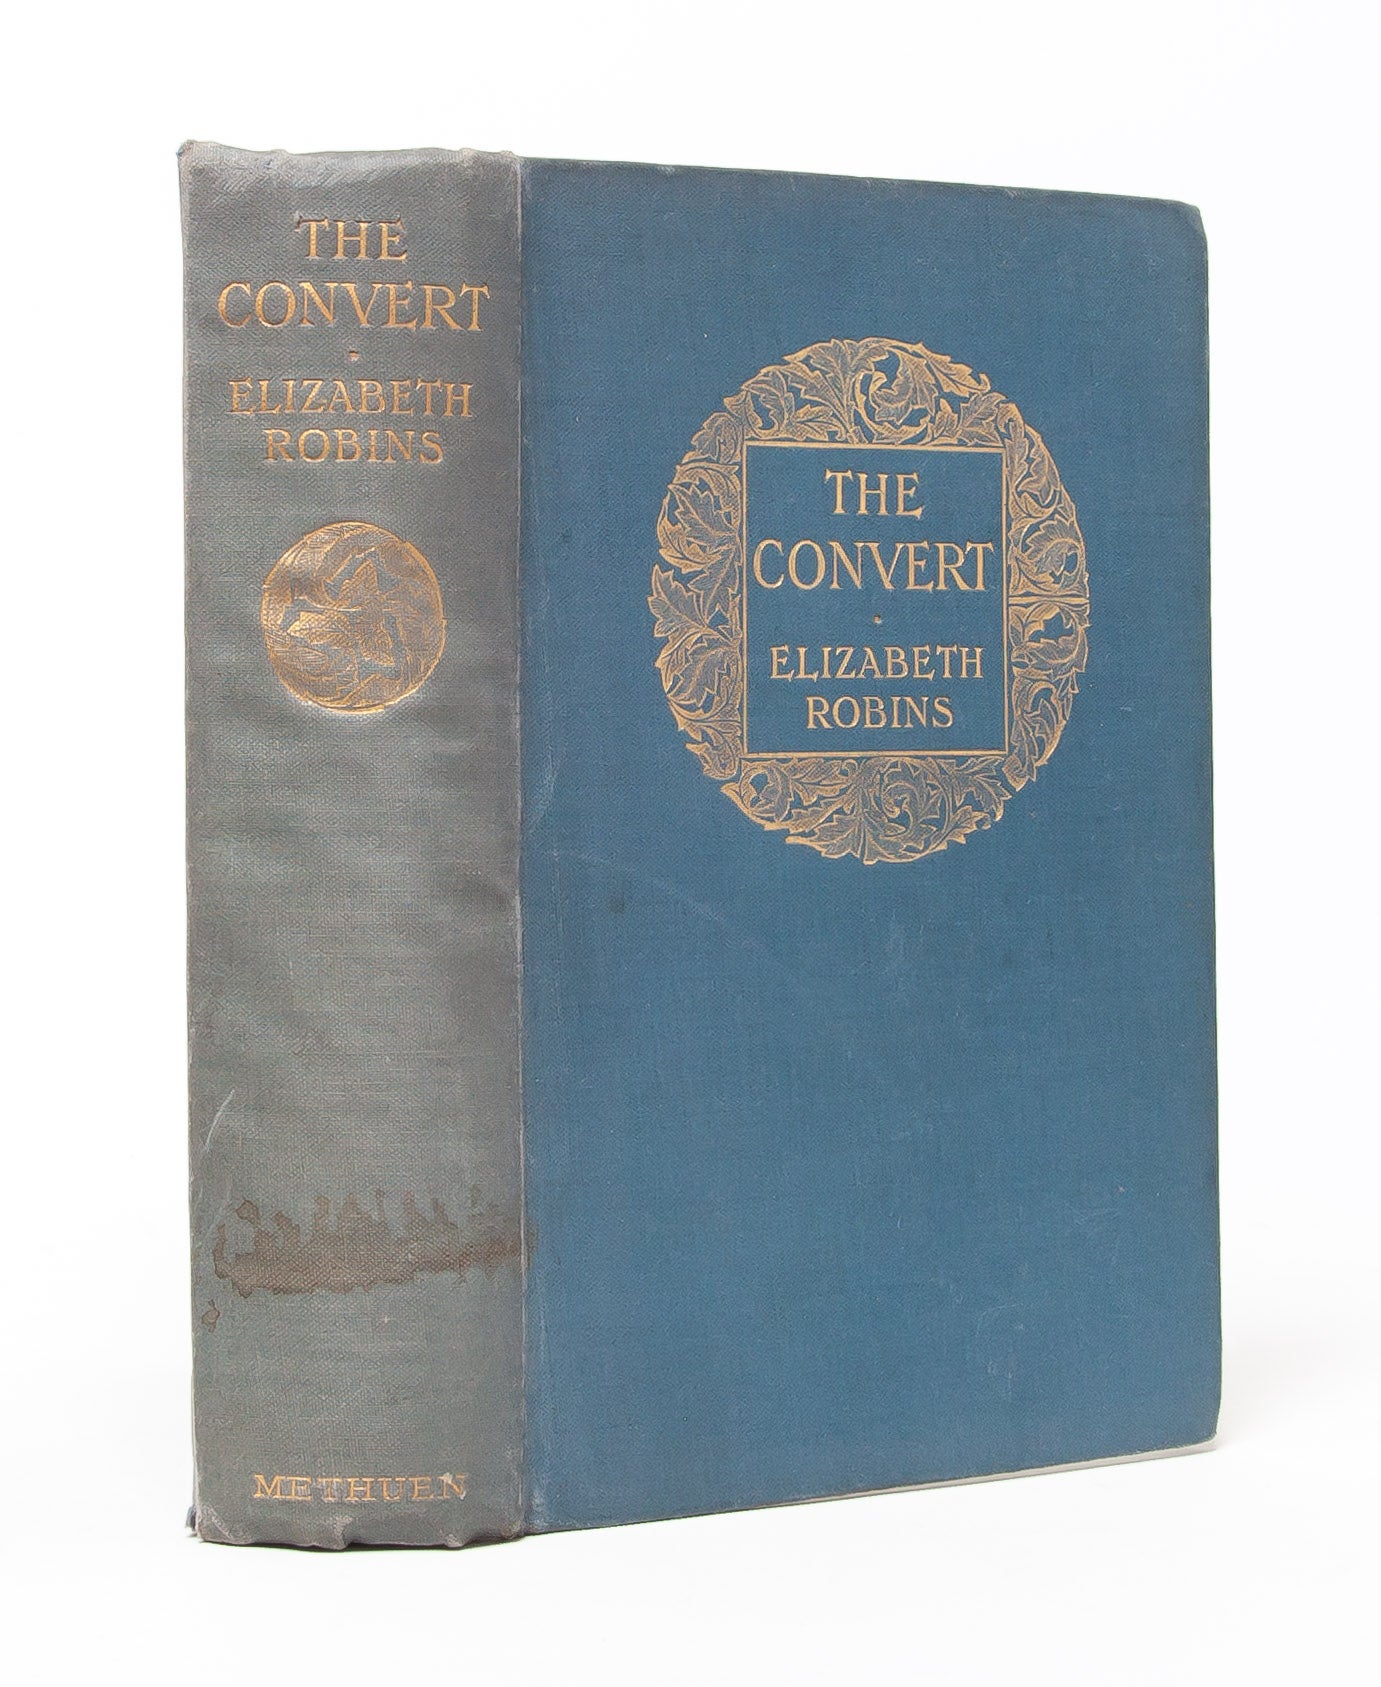 (Item #5801) The Convert. Suffrage, Elizabeth Robins, Reproductive Rights.